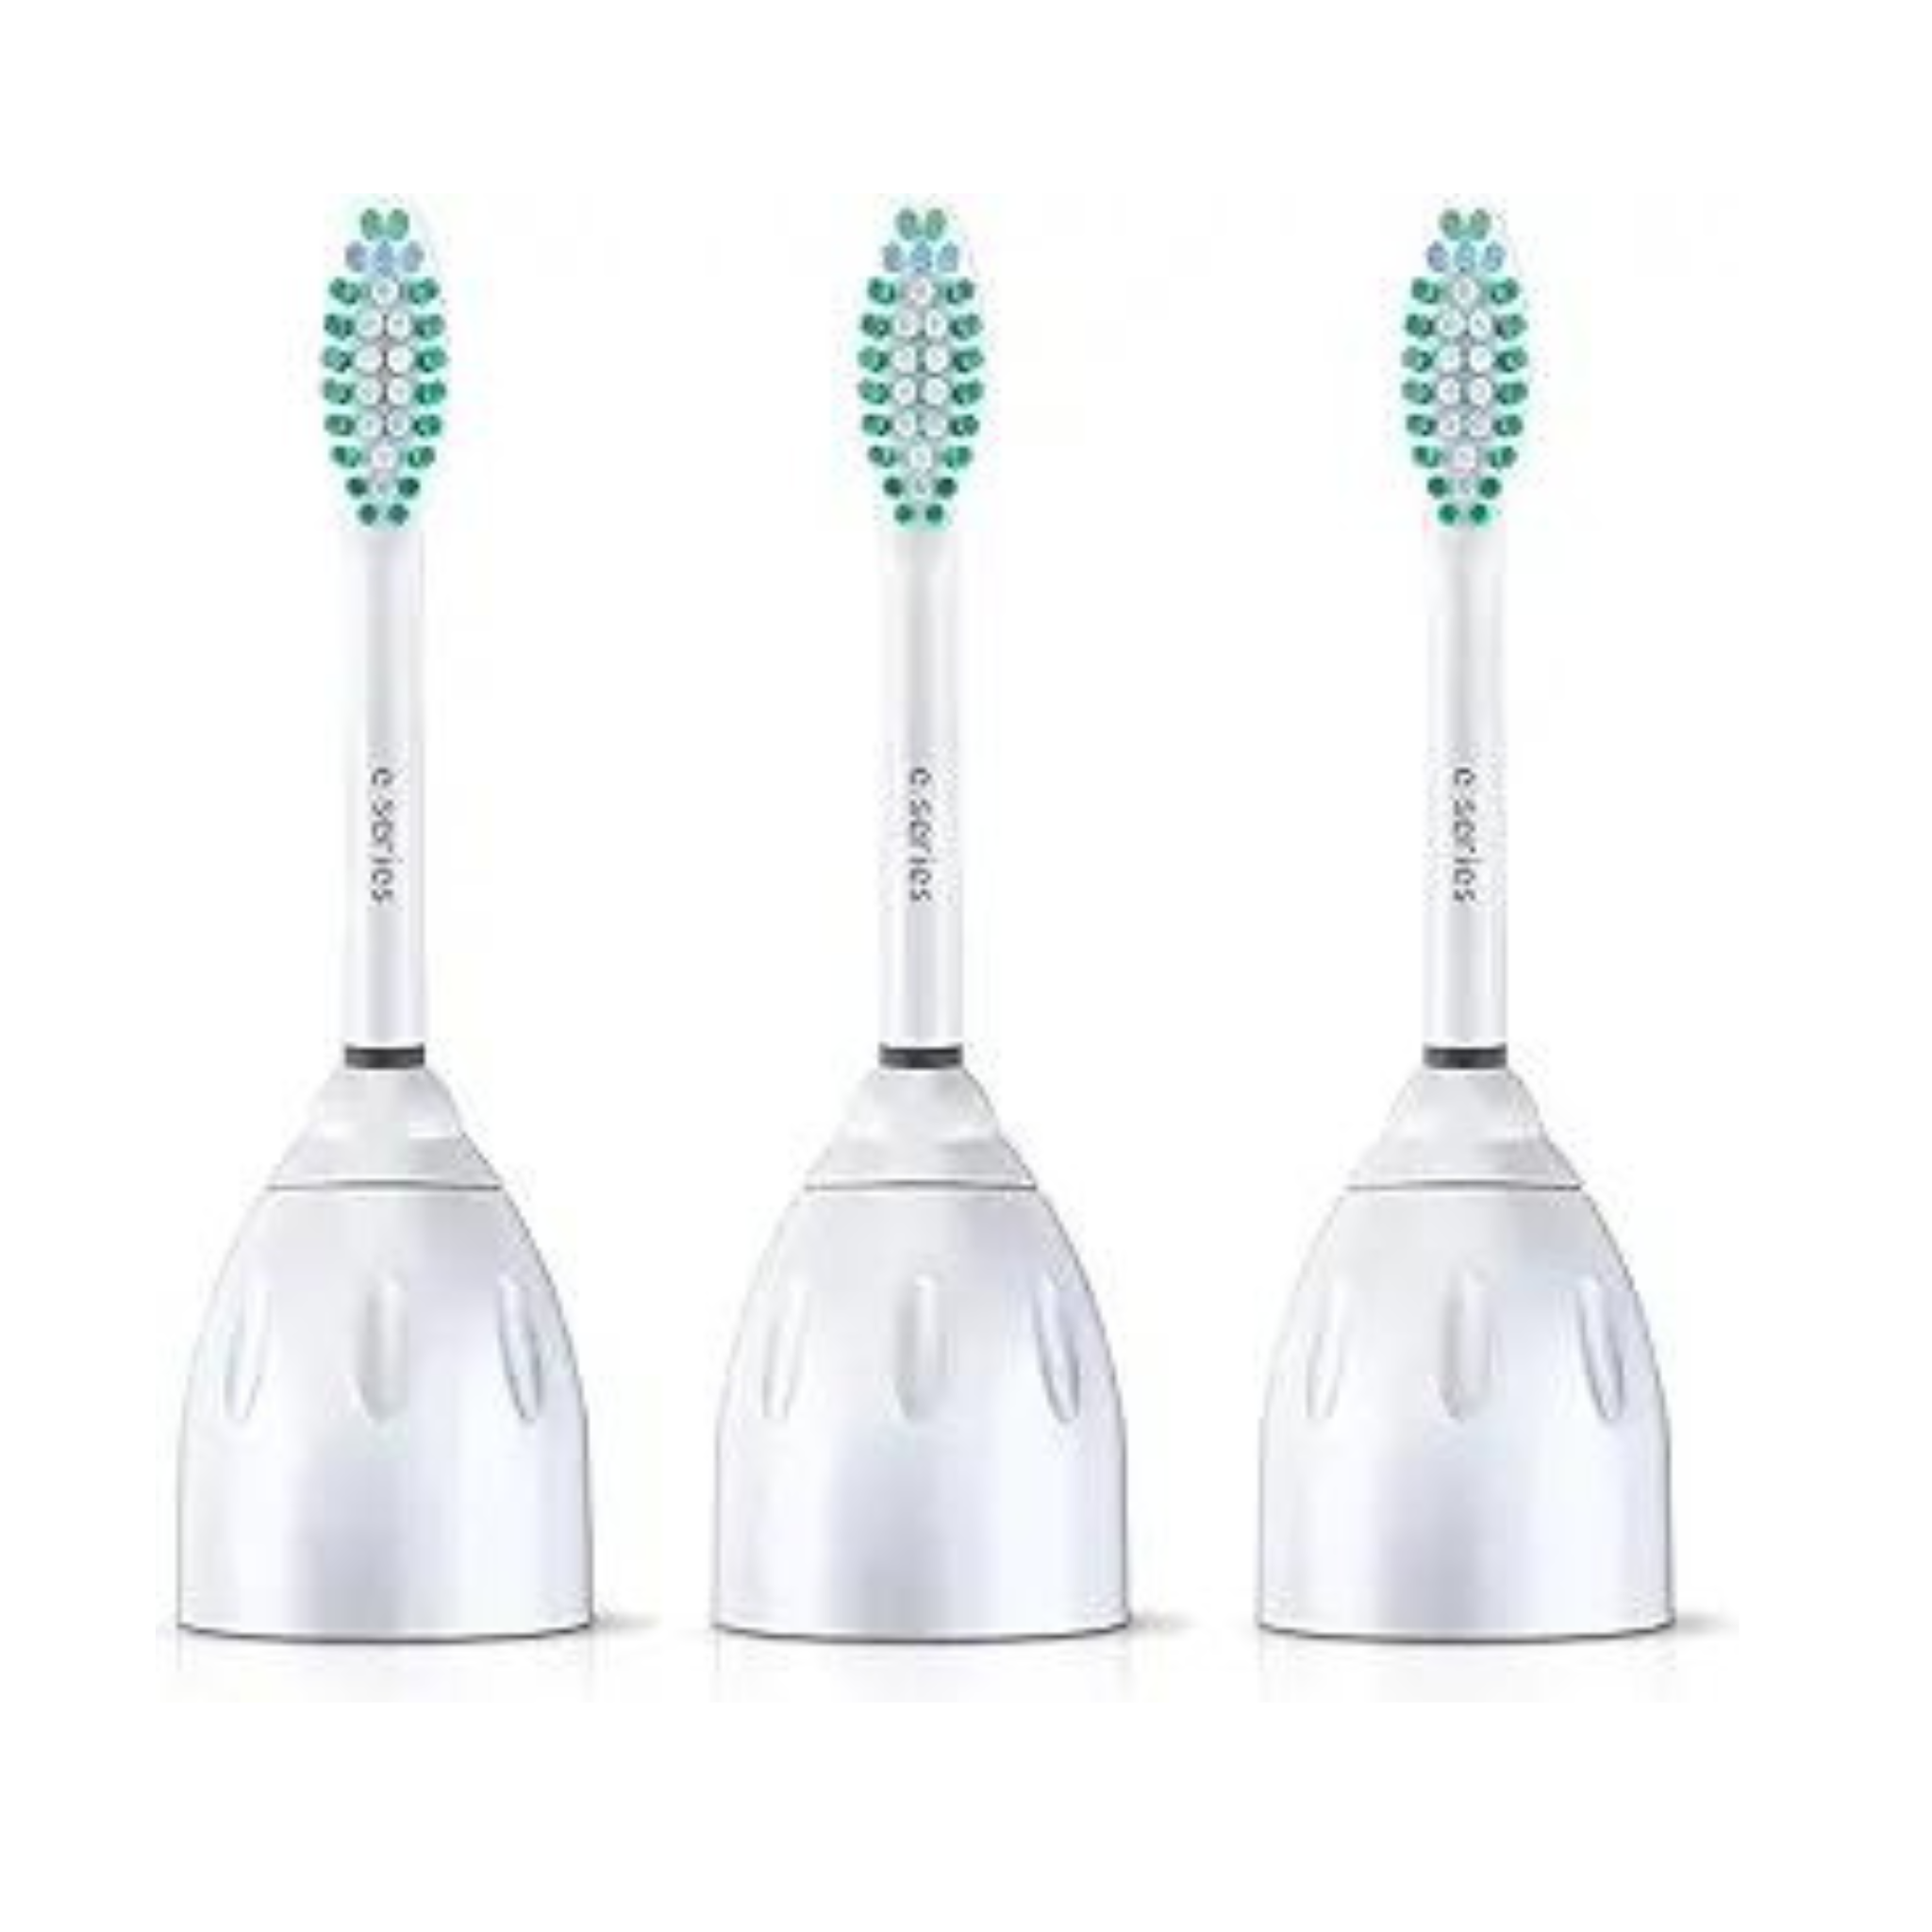 3-Count Philips Sonicare E-Series Replacement Brush Heads